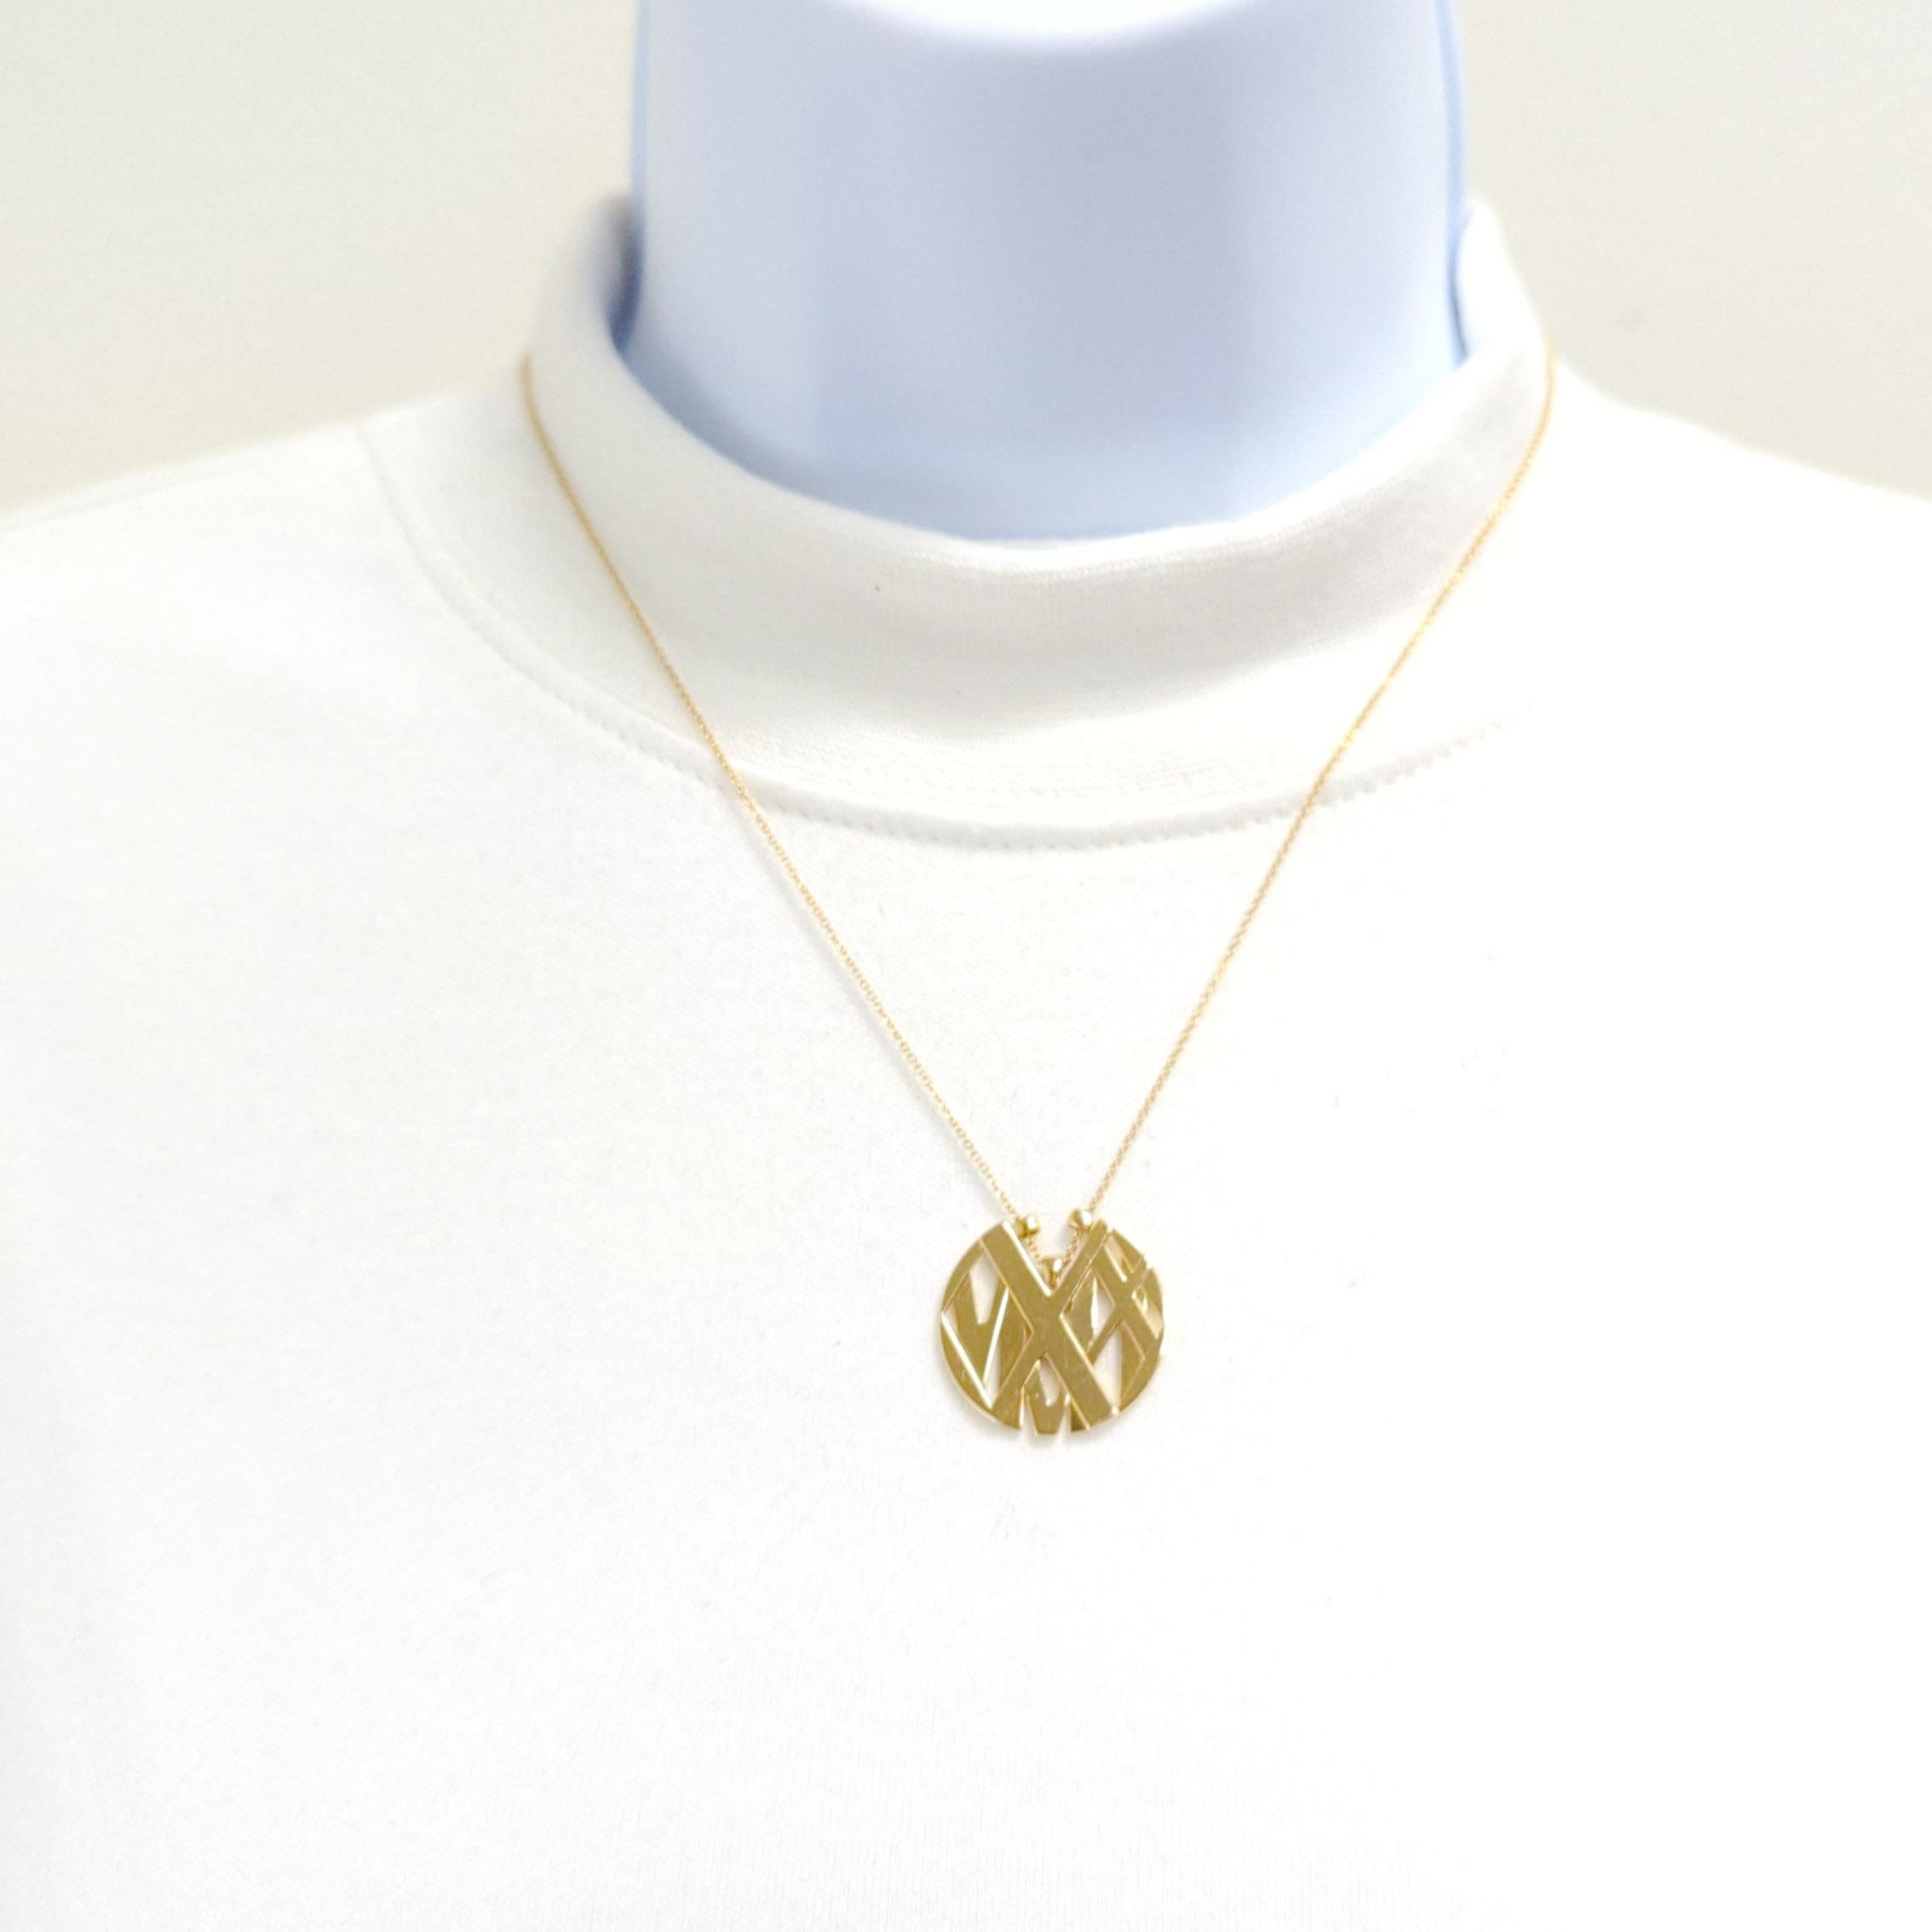 Beautiful Tiffany & Company Atlas pendant necklace handmade in 18k yellow gold.  Chain length is 18